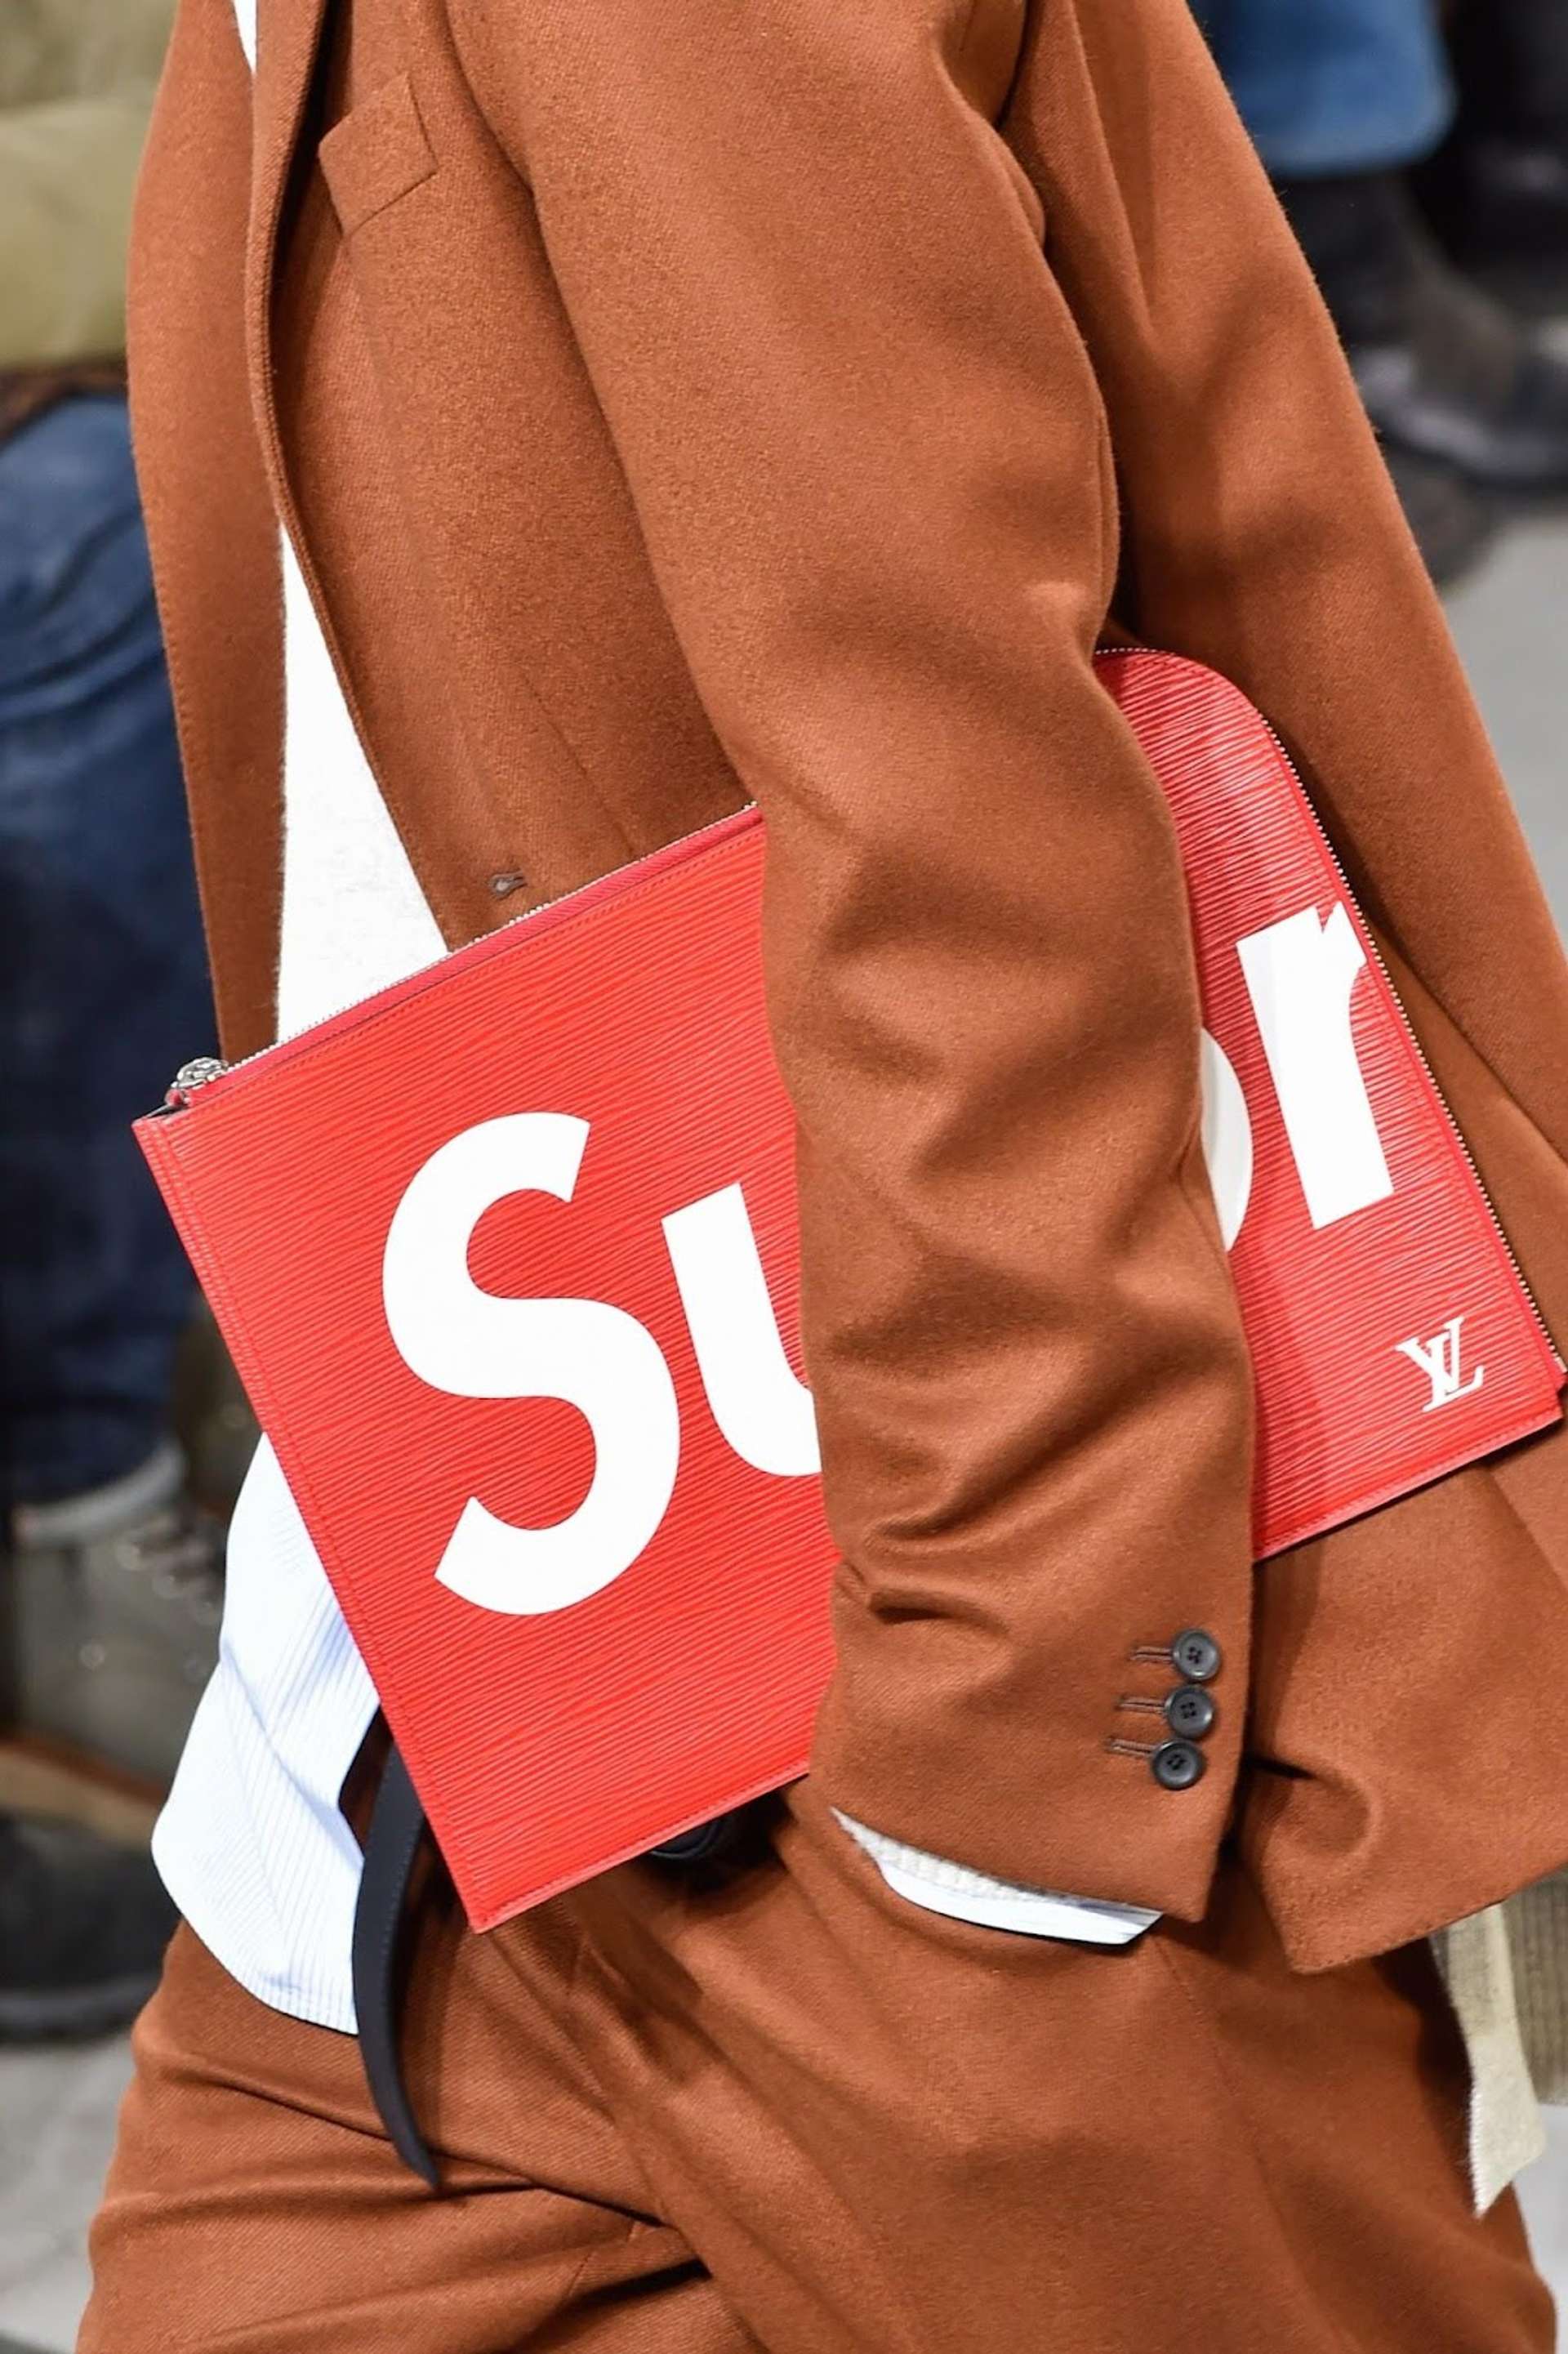 An image of a model wearing a suit while holding one of the bags that brand Supreme designed in collaboration with Louis Vuitton.